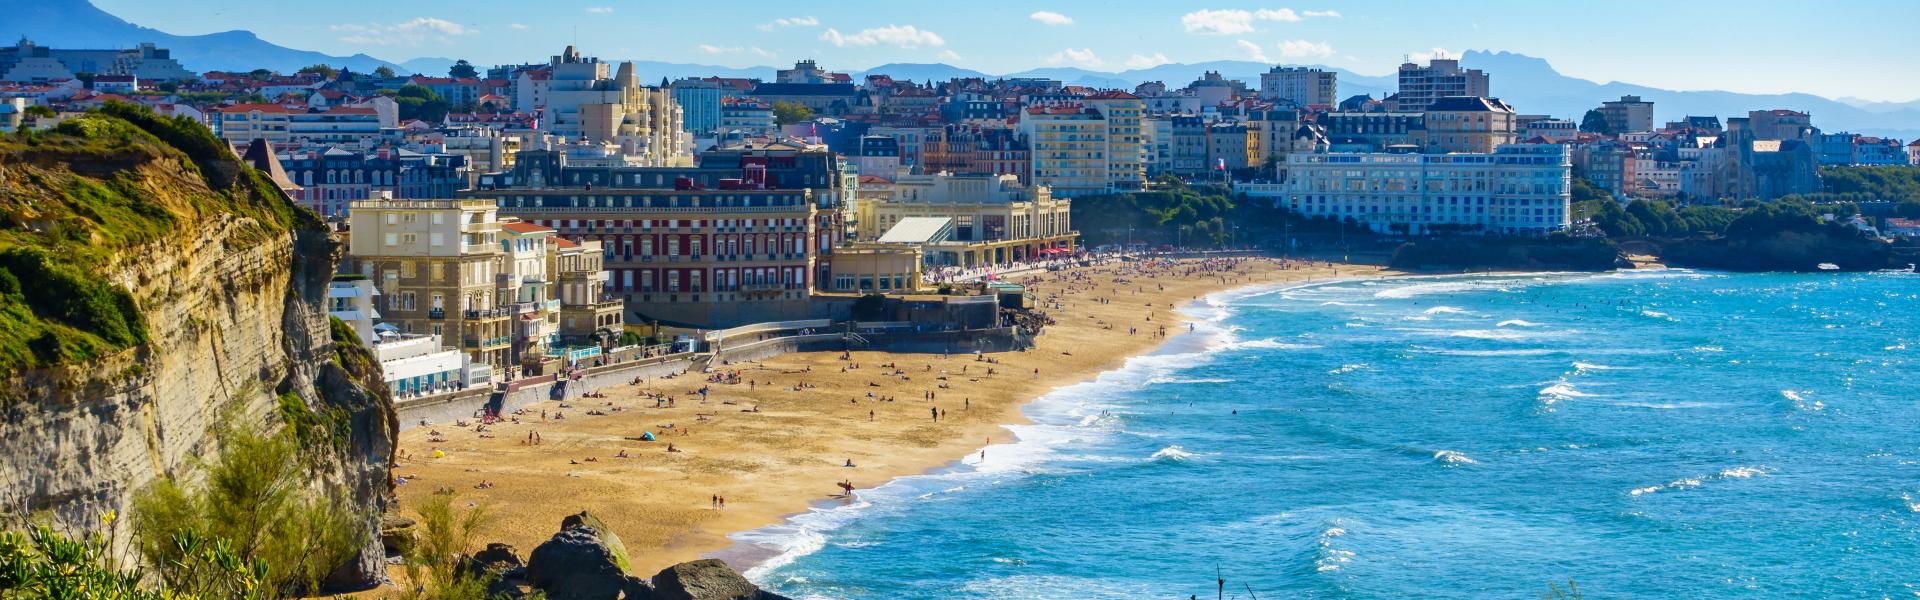 Find the perfect accommodation for your holiday in Biarritz - Casamundo